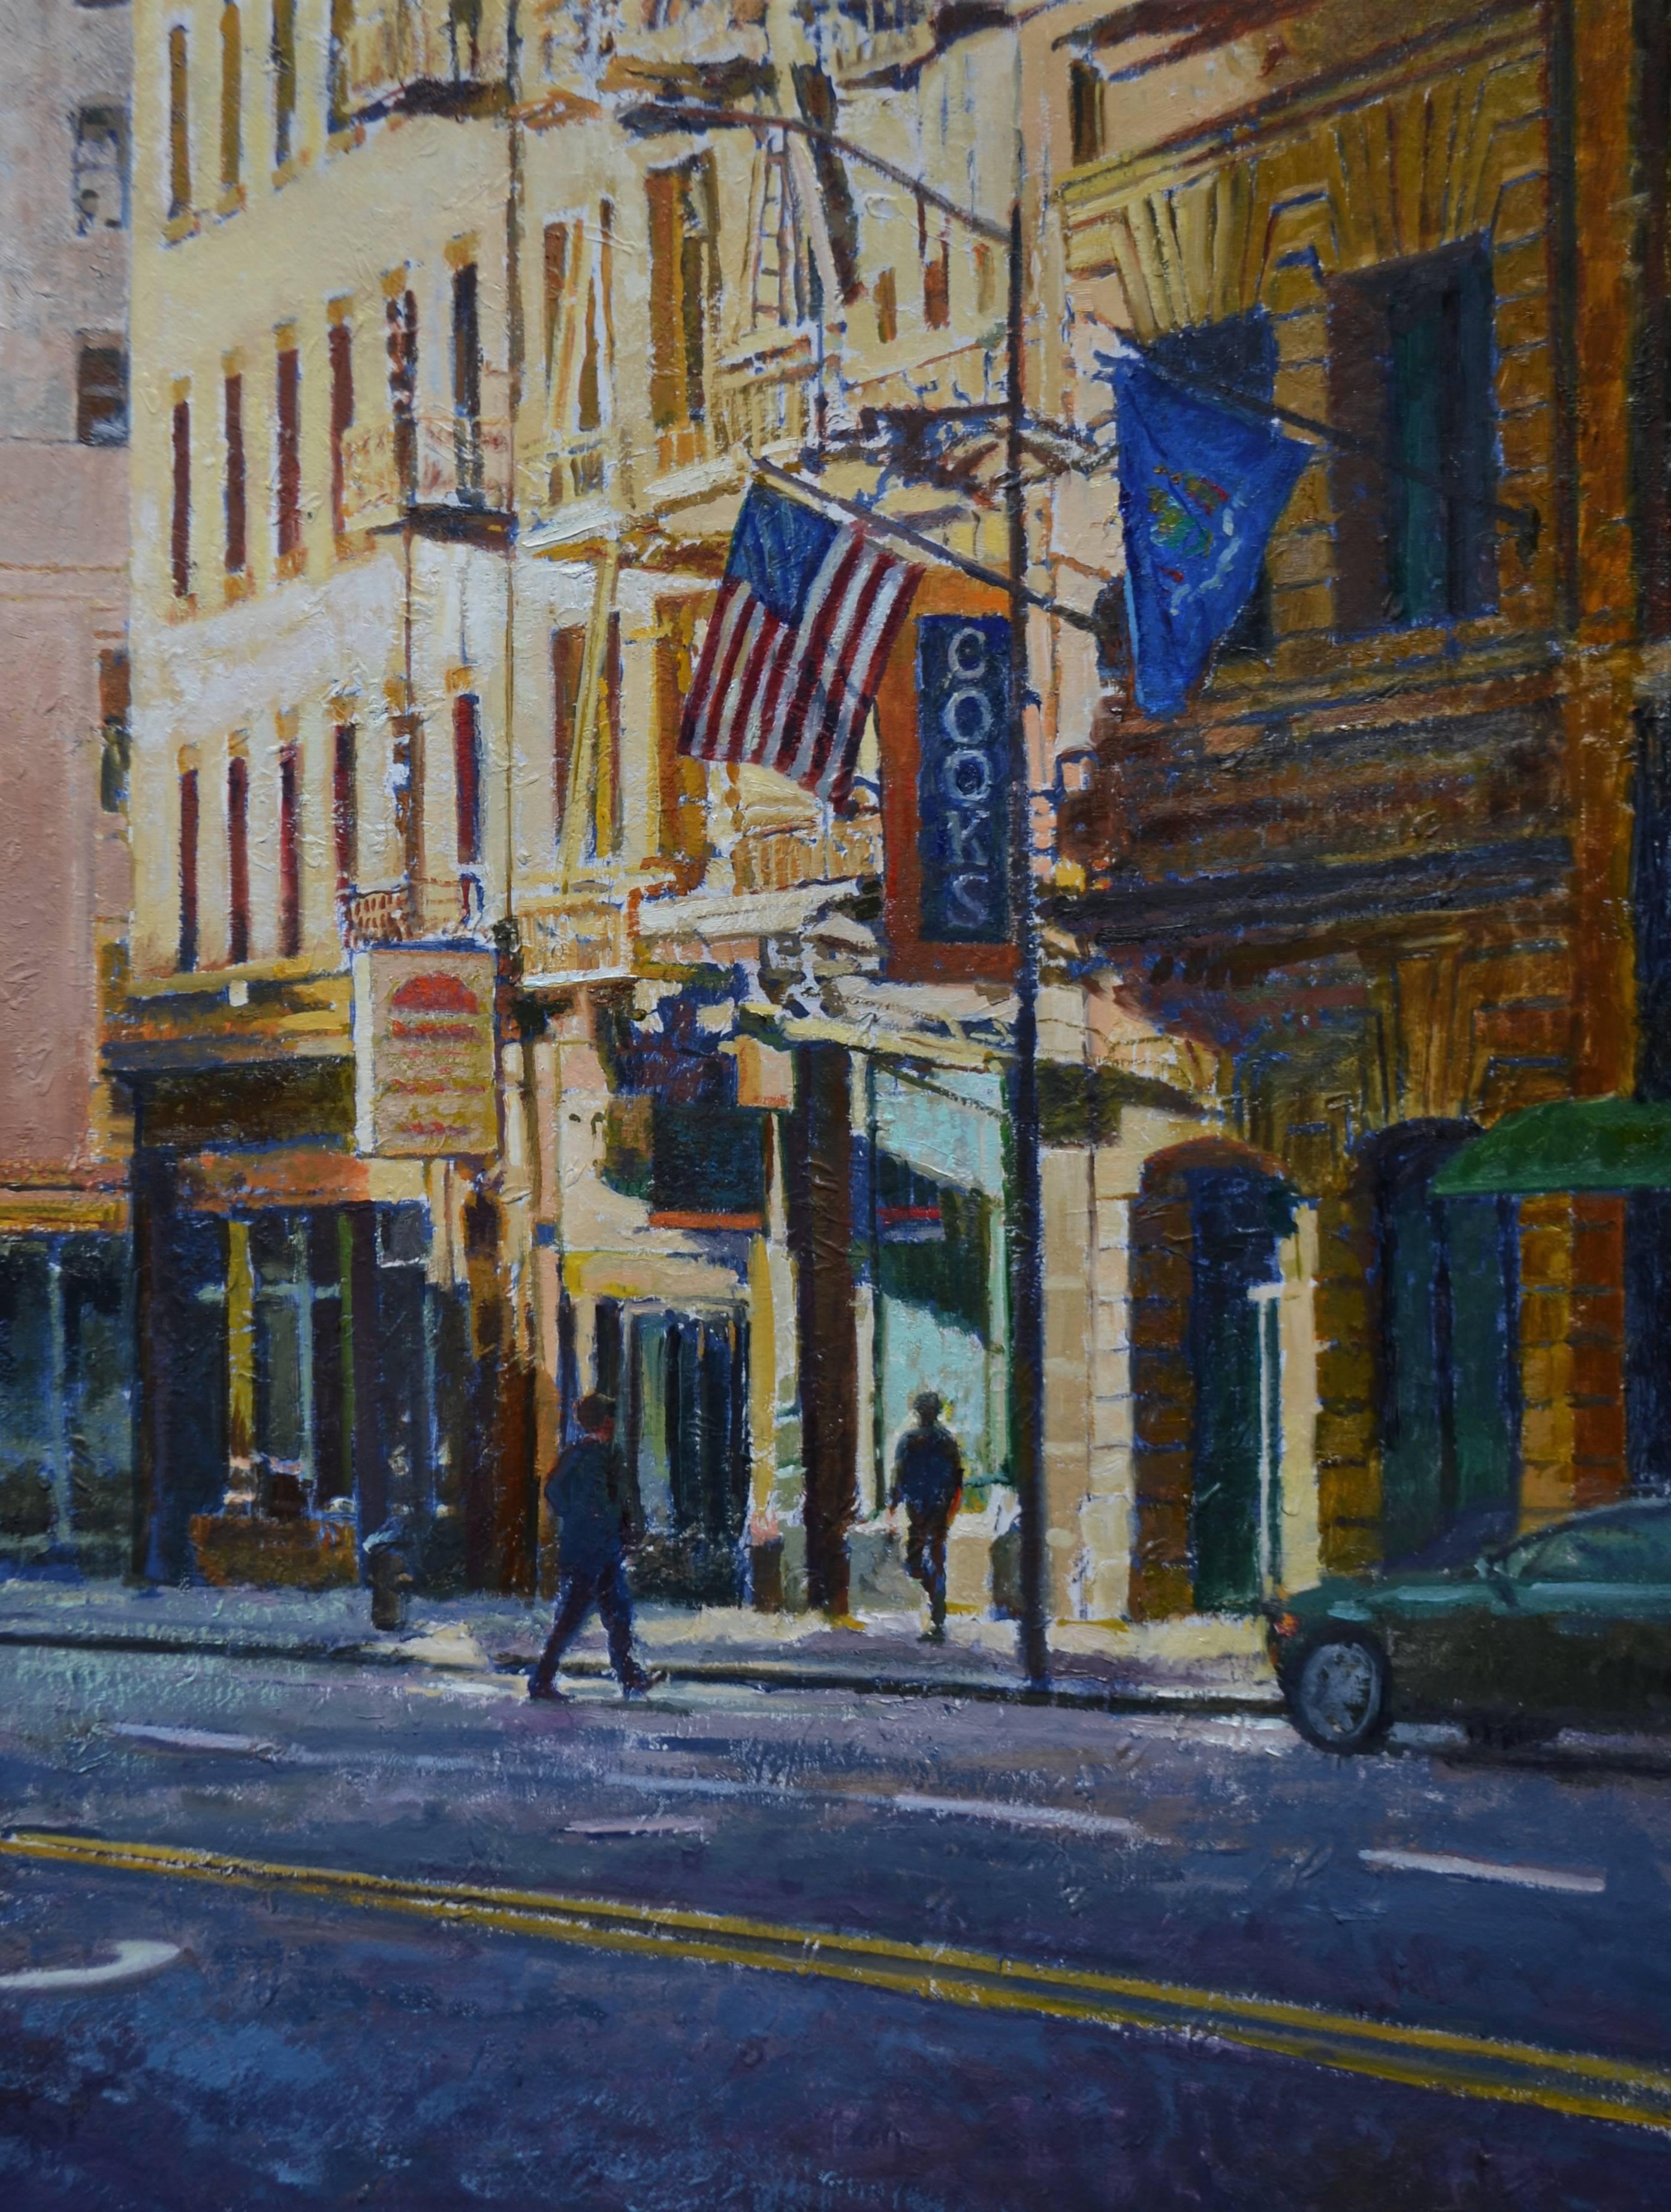 Early Morning Light in the City, Framed - Painting by Dean Larson